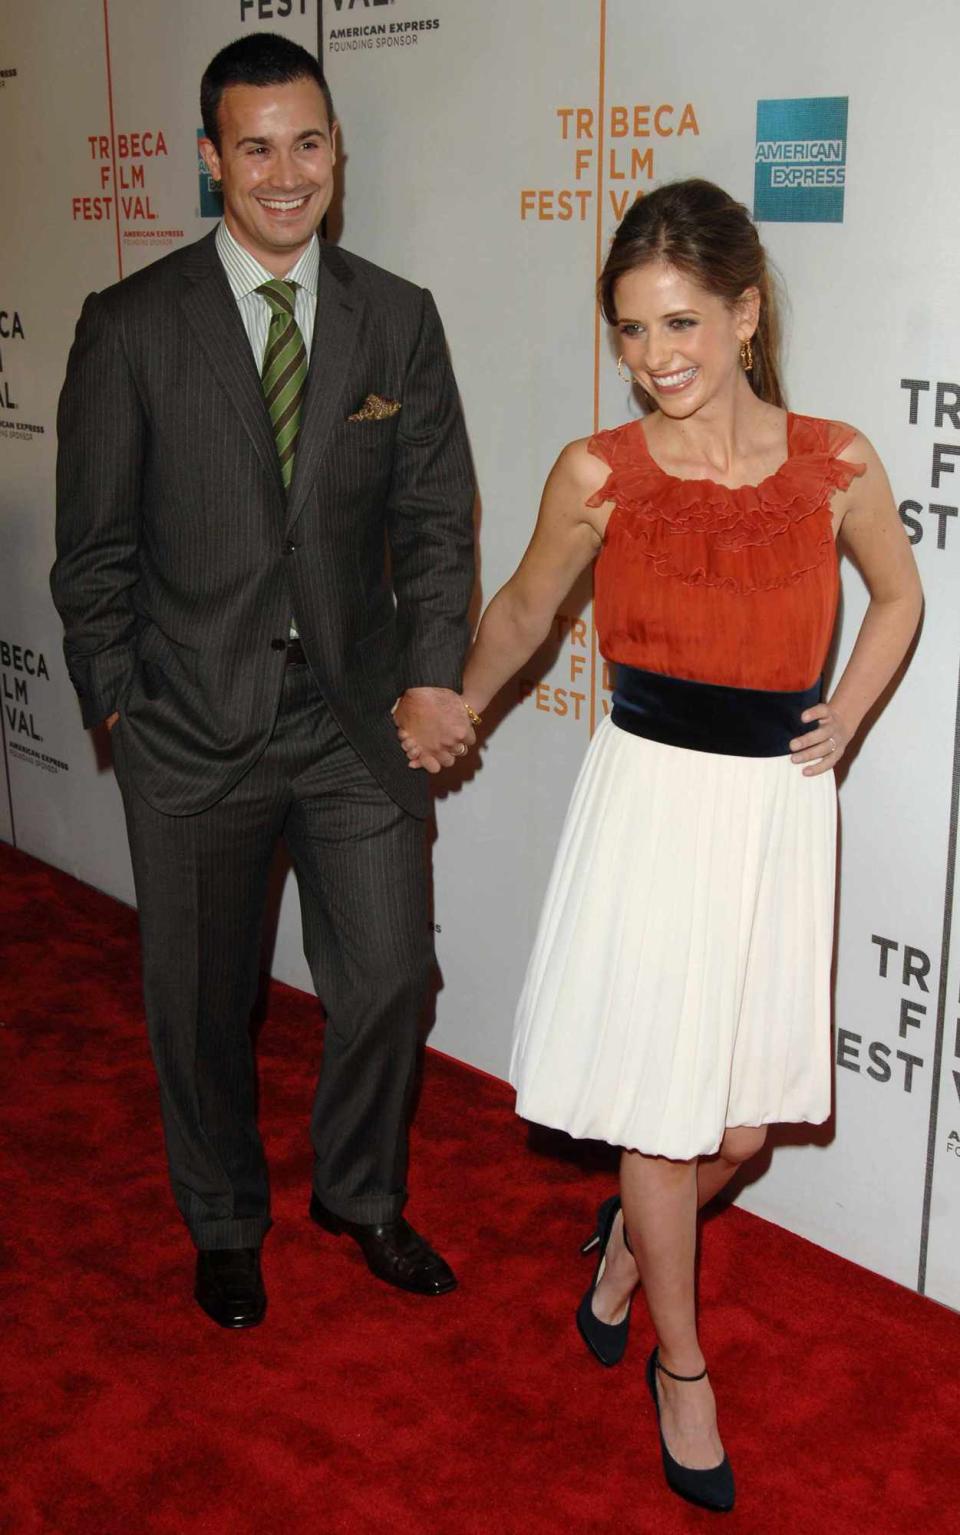 Freddy Prince Jr. and Sarah Michelle Gellar arrive to the 6th Annual Tribeca Film Festival 'Suburban Girl' premiere held at Borough of Manhattan Community College, New York City